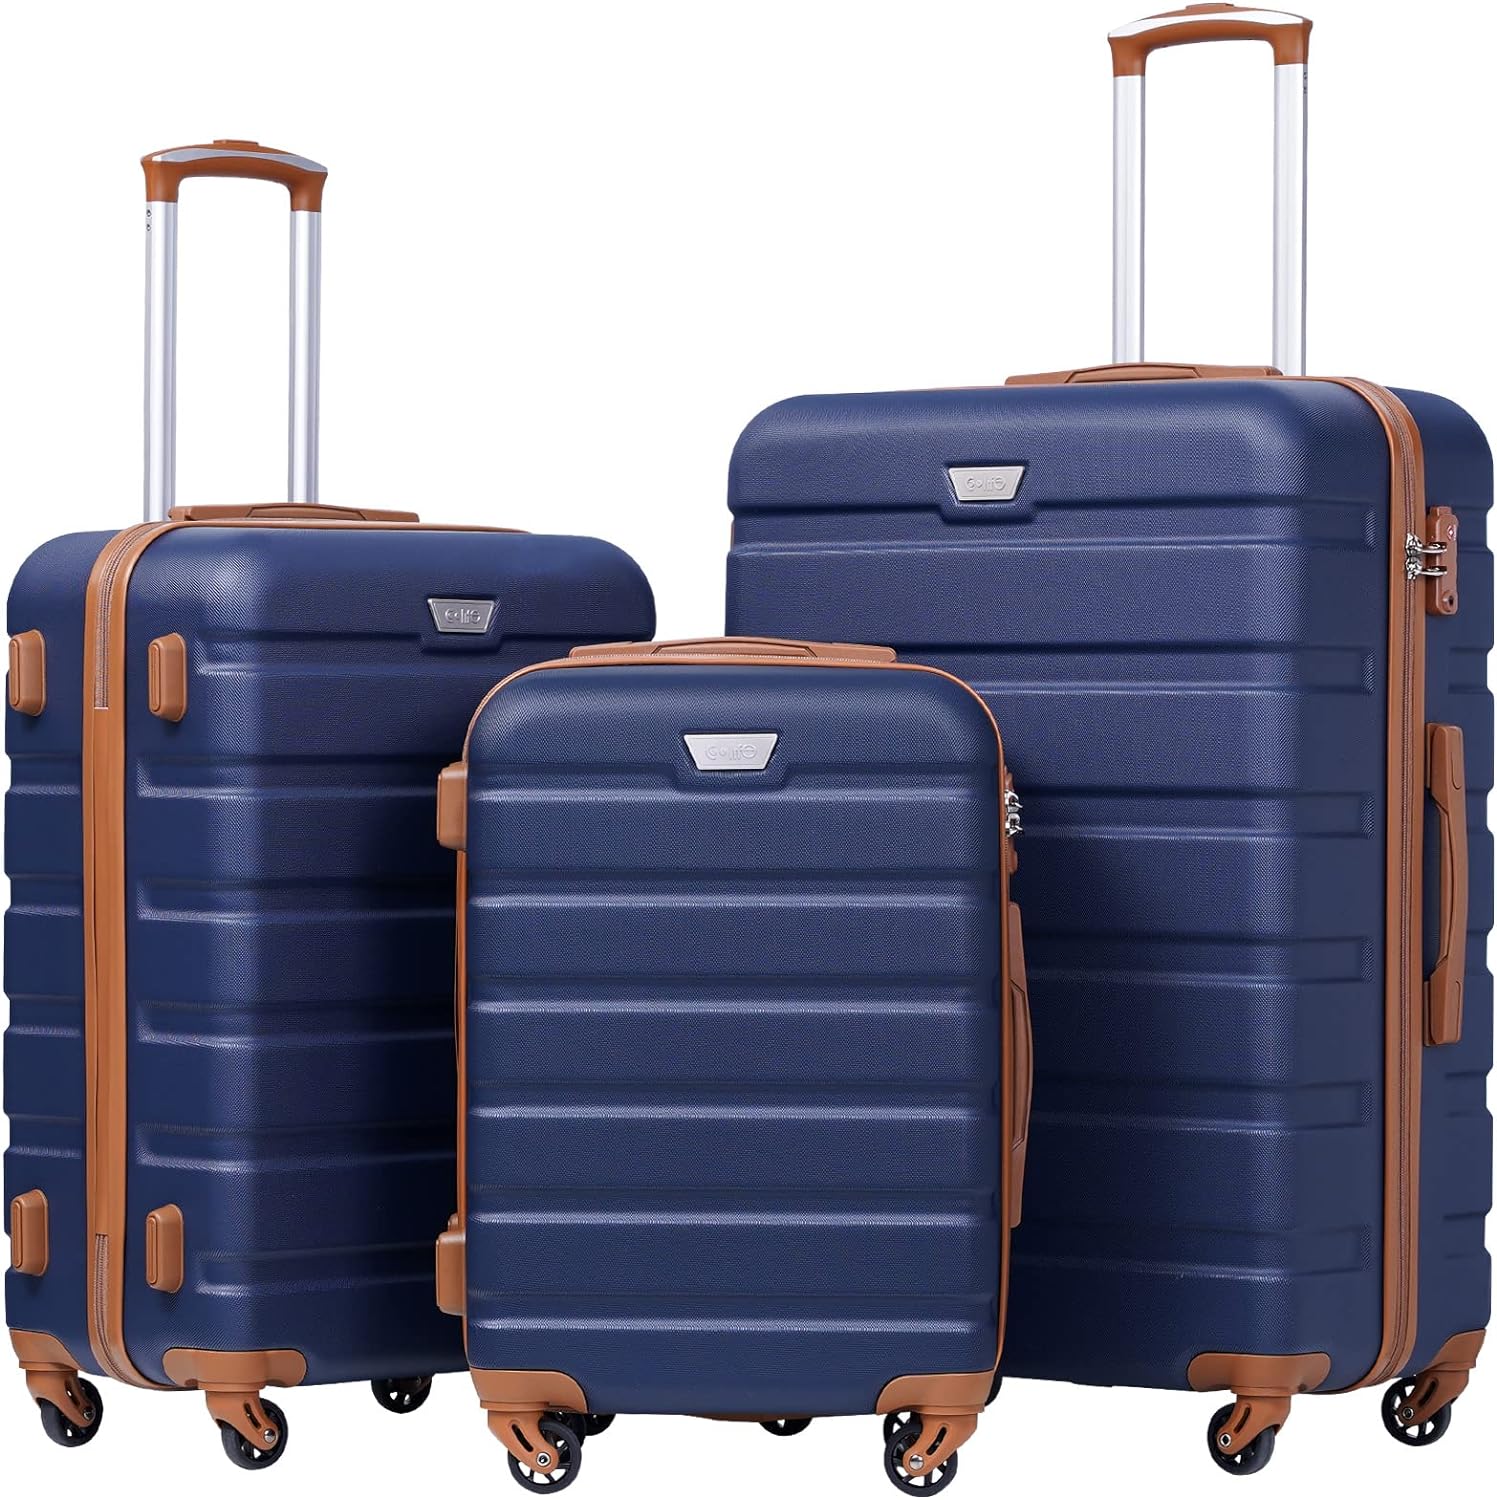 You are currently viewing Best Budget Suitcase: Durable and Stylish Luggage Set